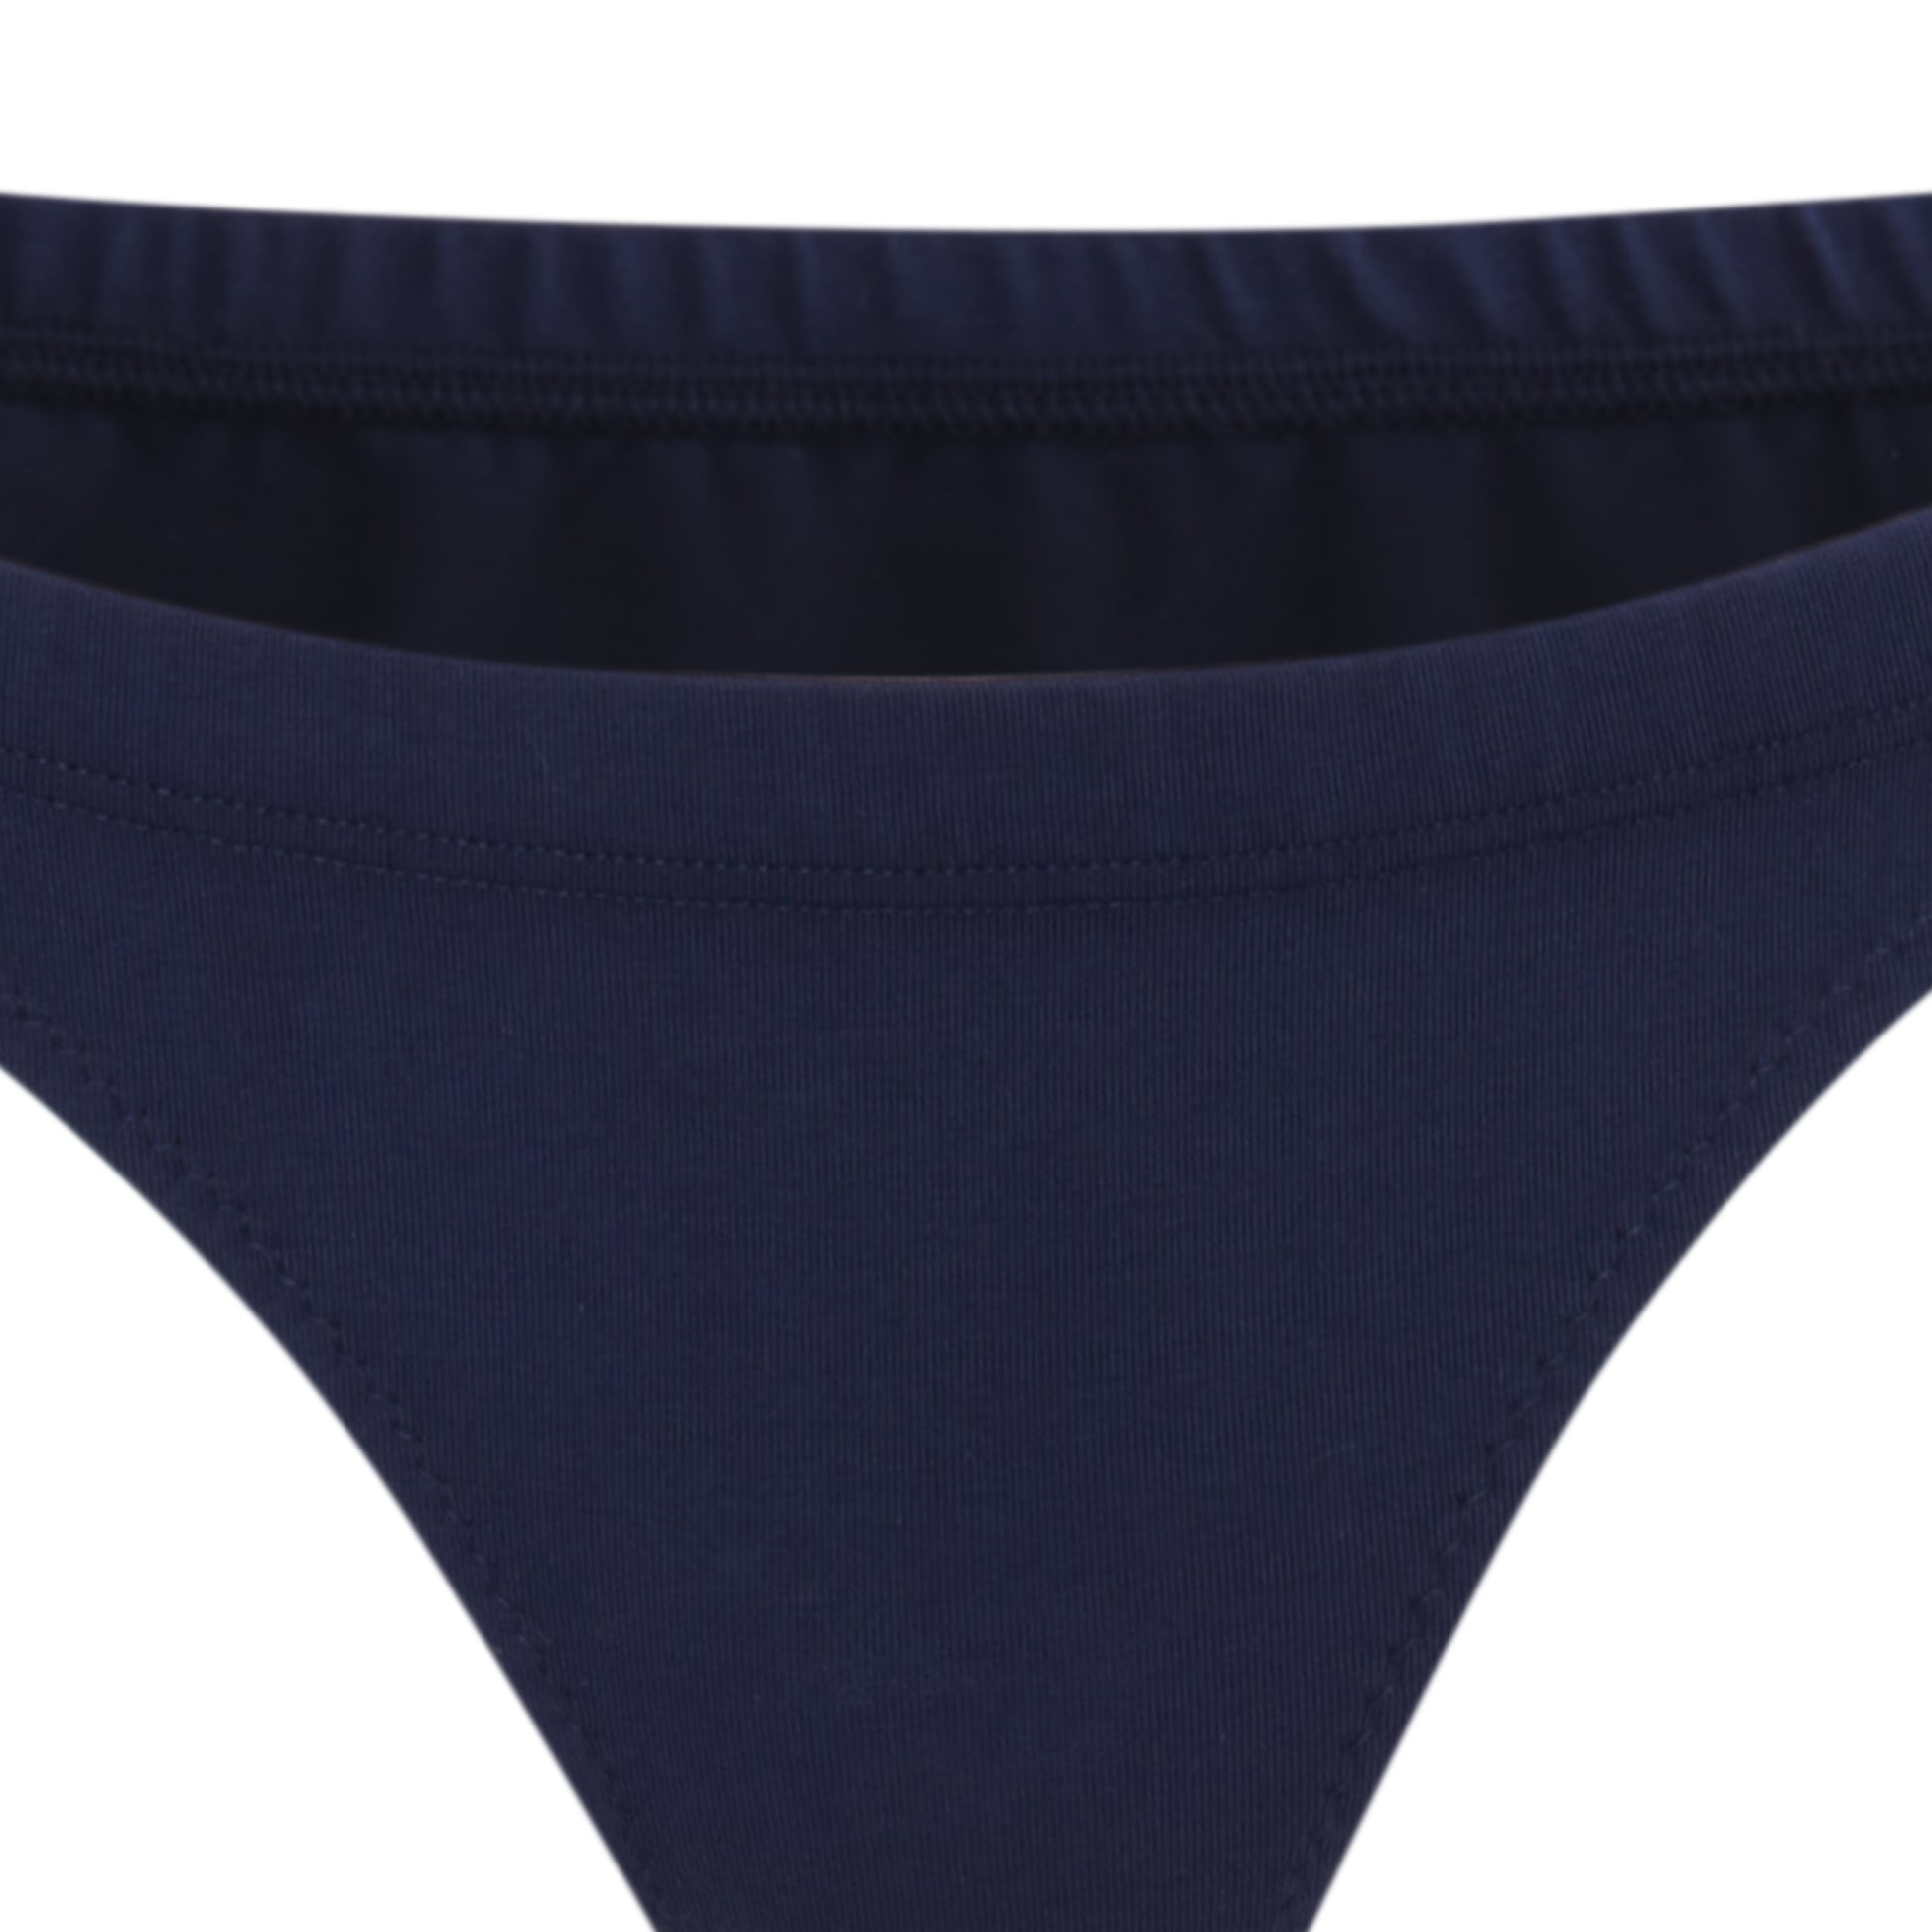 Organic Cotton Knickers Womens Briefs Navy Blue Low-rise Bikini Bottoms  Comfortable Knickers Pack of 5 